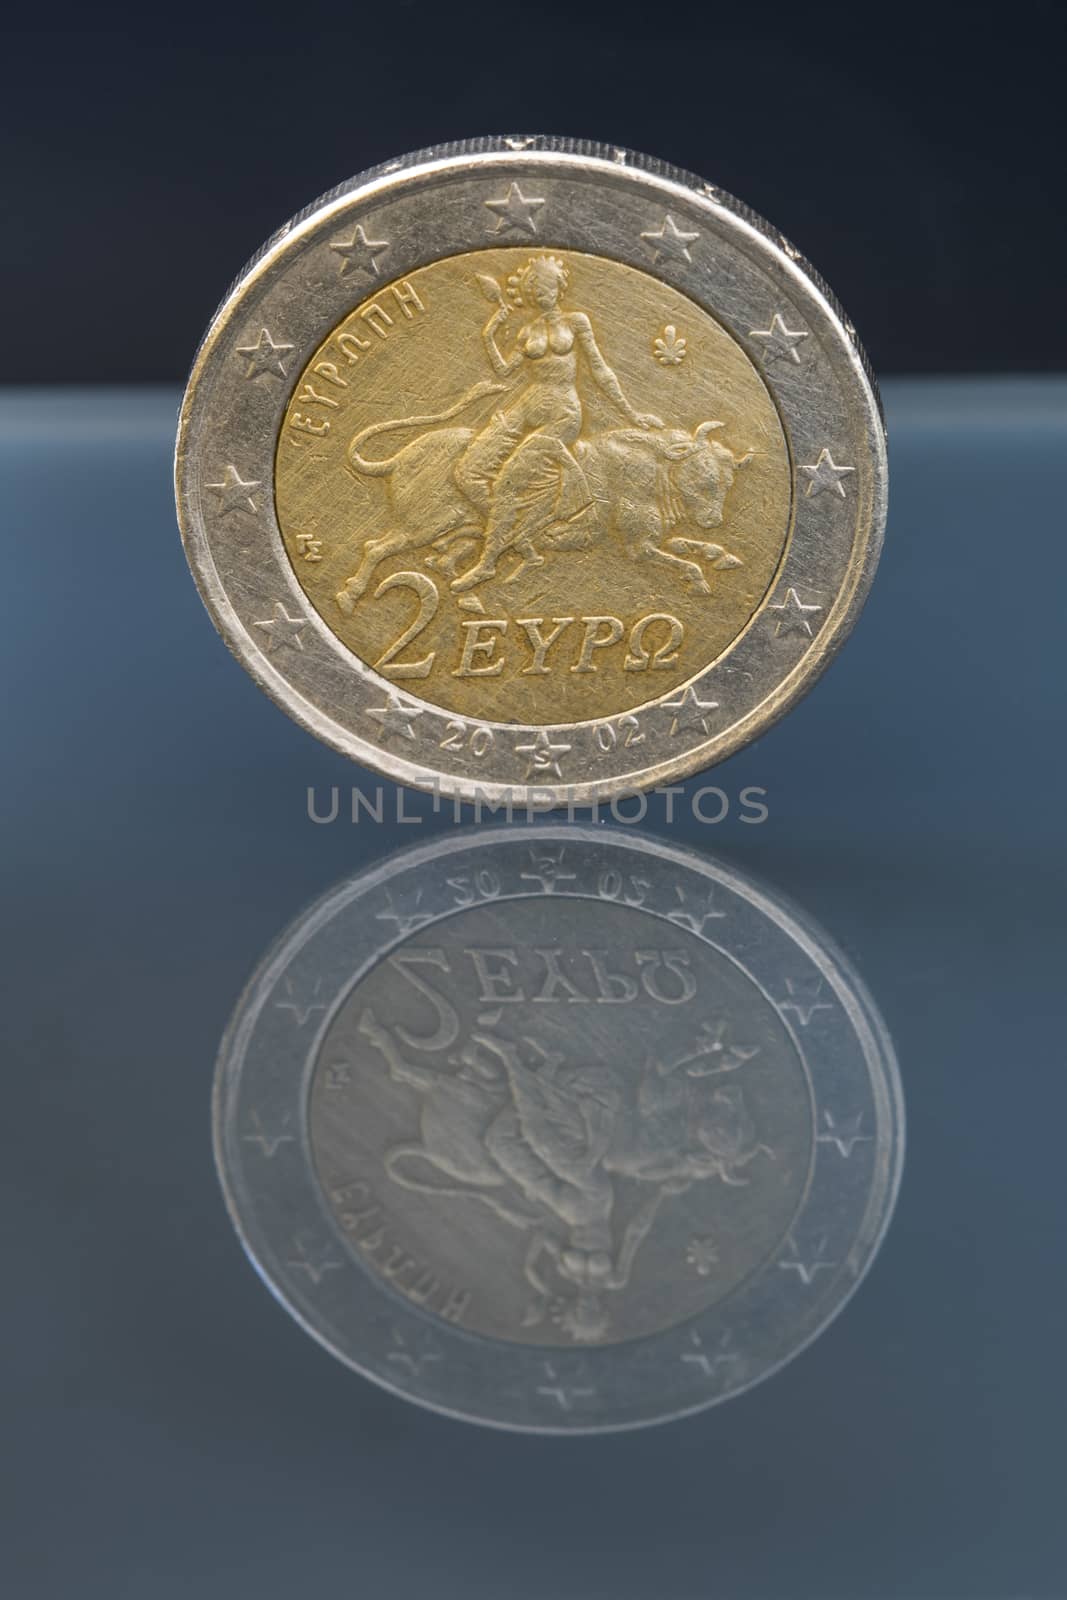 Two, 2 Euro coin from Greece, regular mint, Europa riding the bull